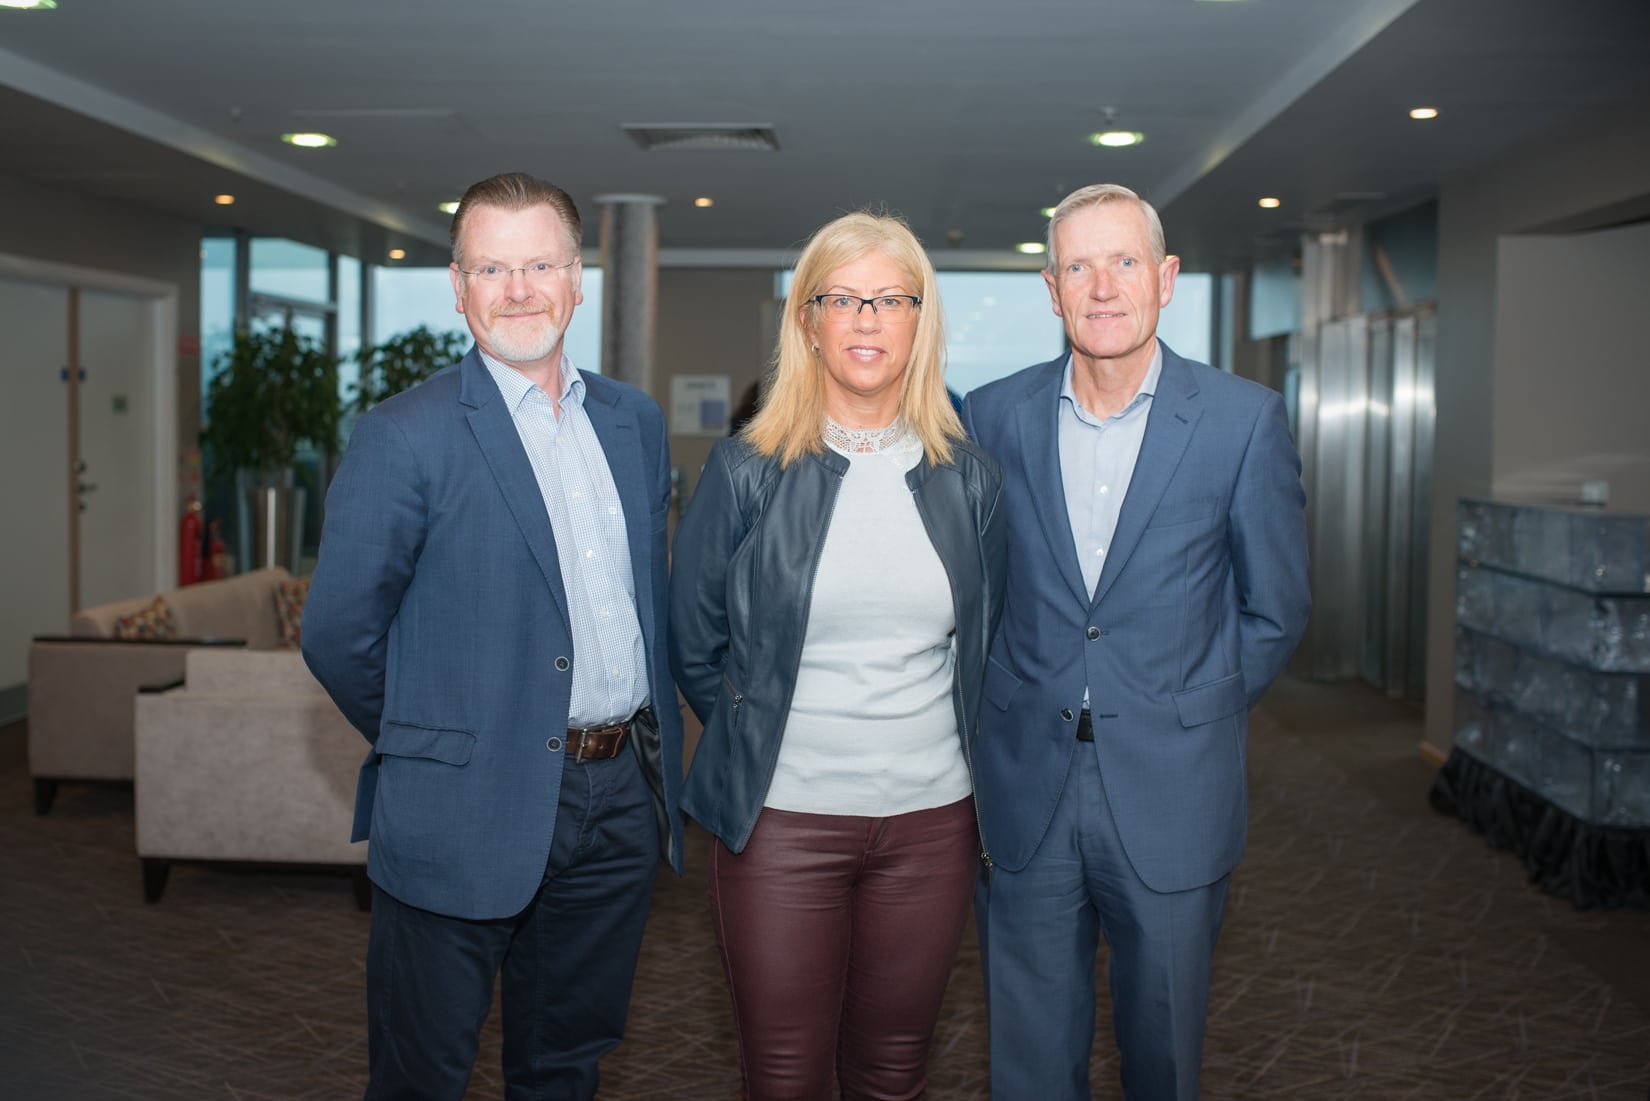 No repro fee-Business Excellence Seminar: Wealth Management. Event sponsored by AIB- 11-09-2018, From Left to Right: Mark McConnell - ECOS, Colette Vogel - Bothwell and Vogel, Dominic Punch - Shannon Knights LTD. 
Photo credit Shauna Kennedy